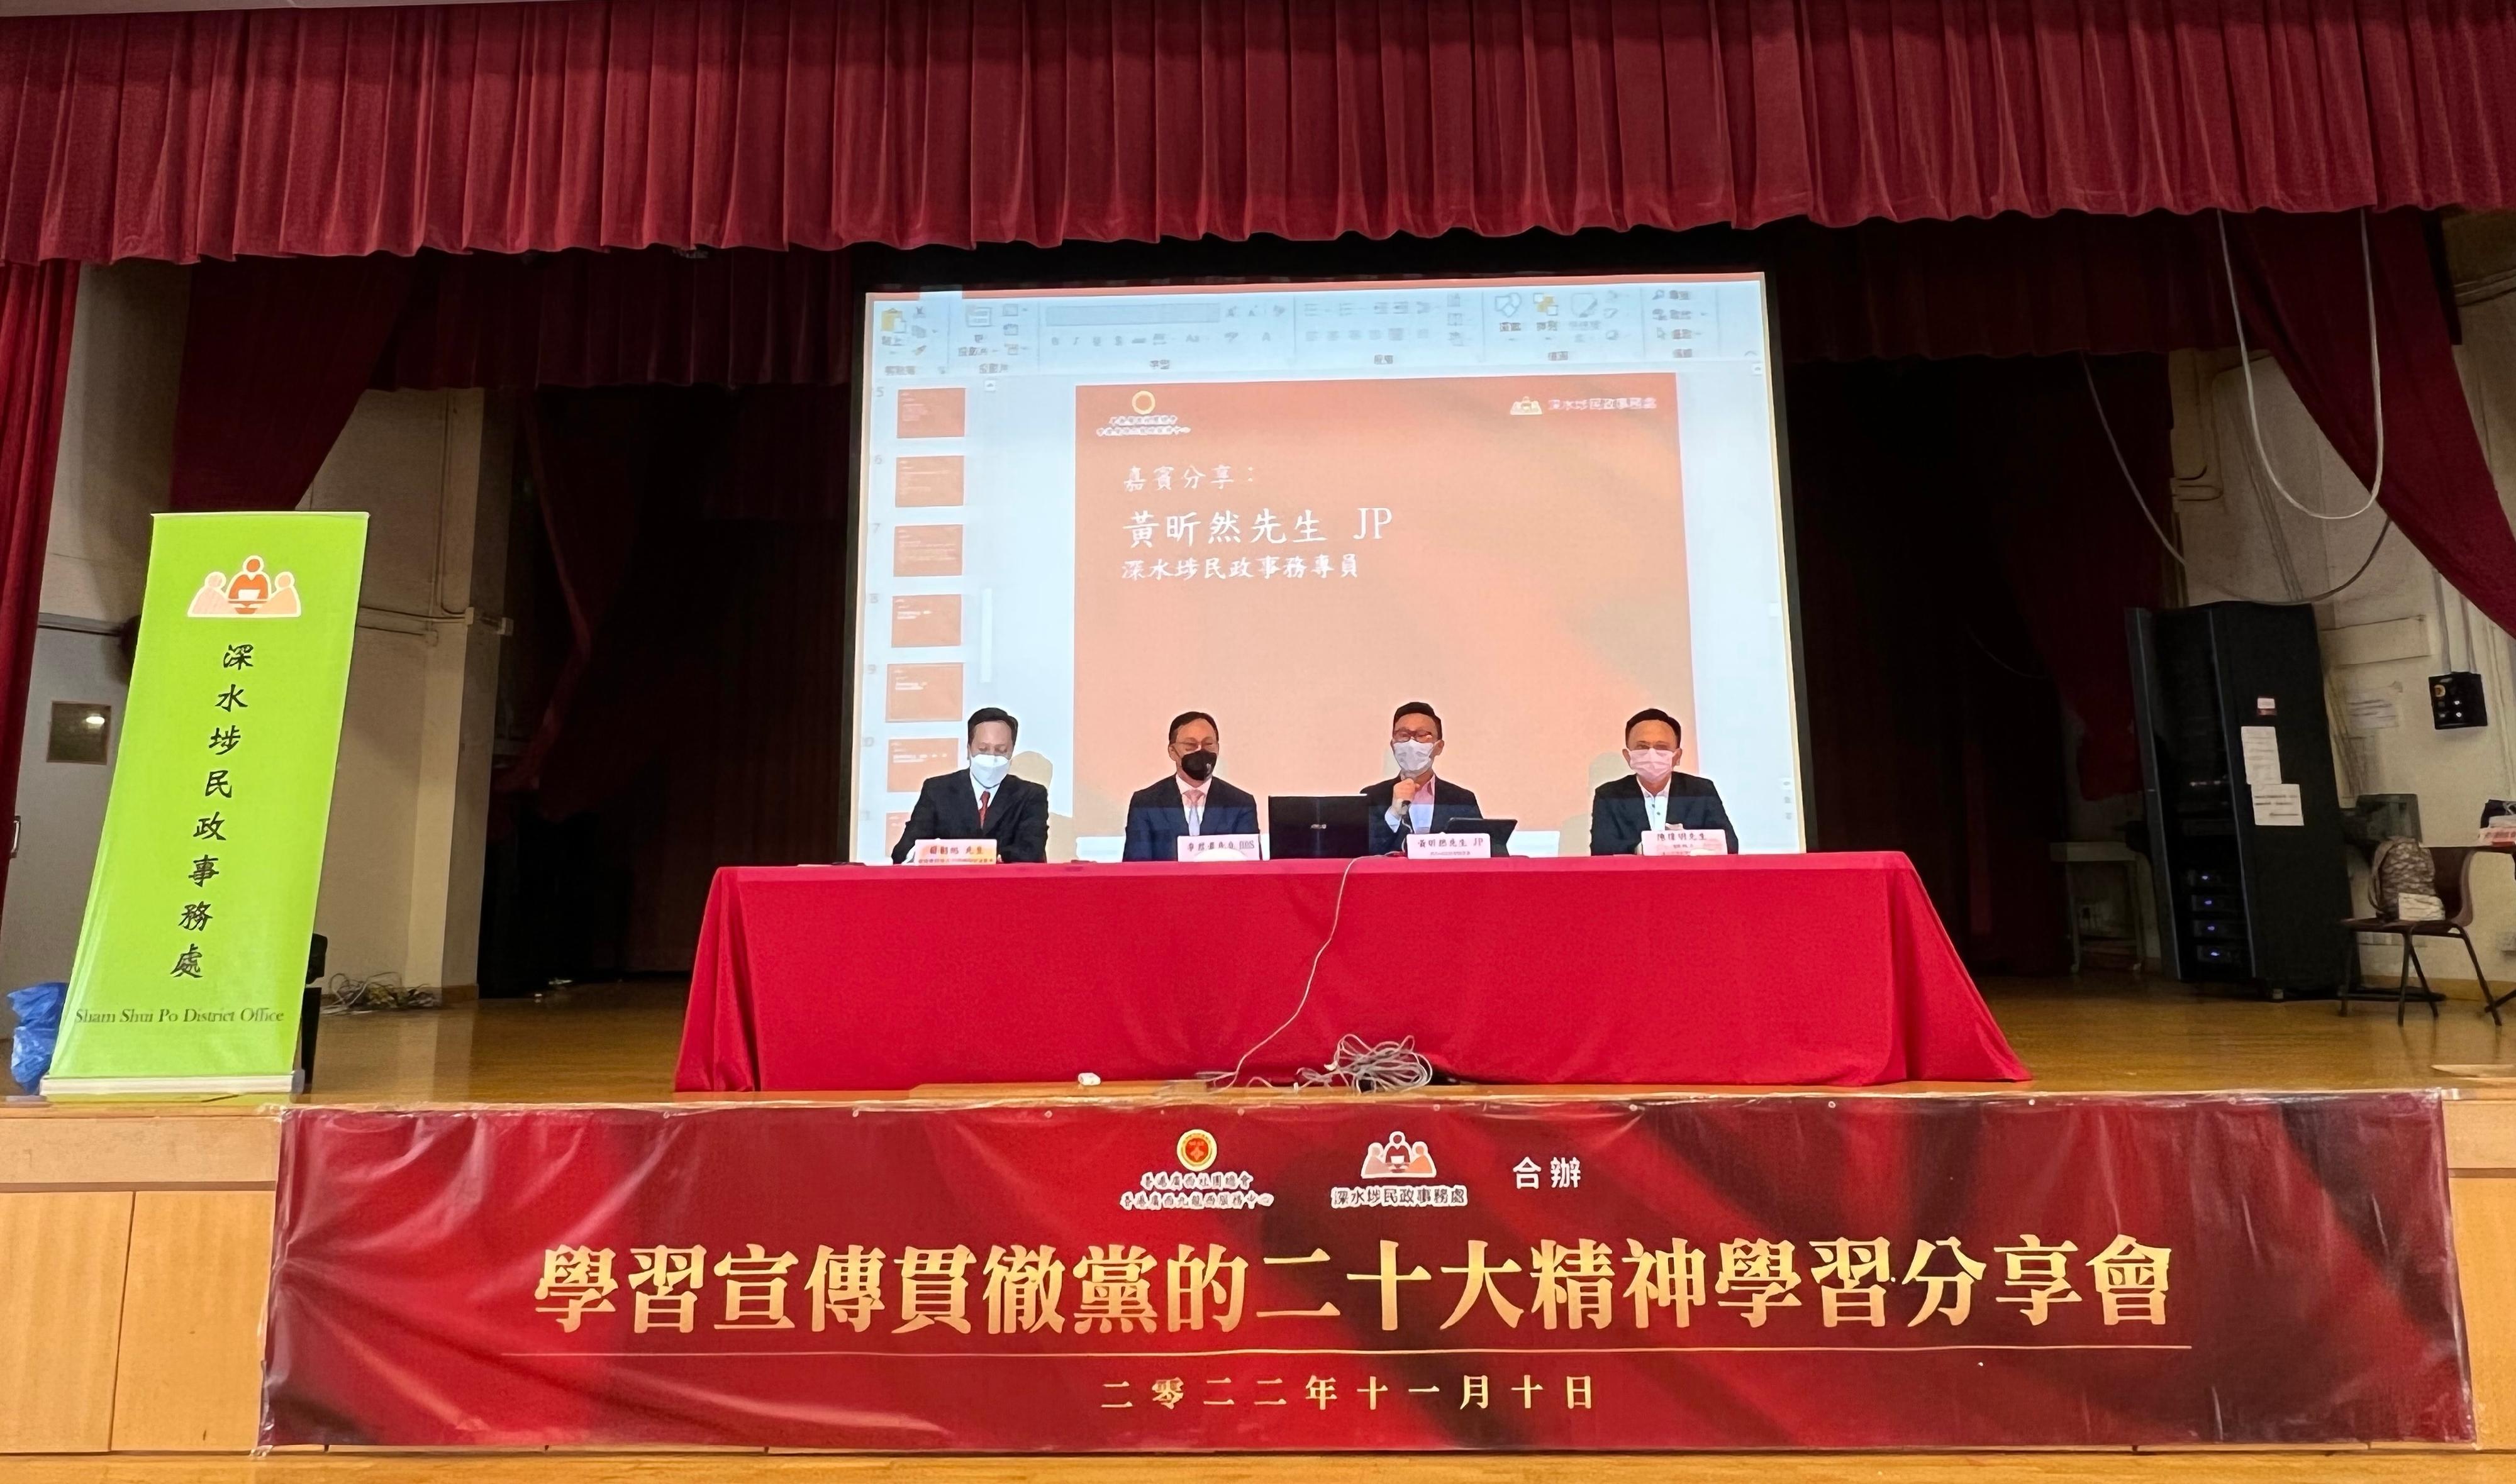 The Sham Shui Po District Office, together with the Federation of Guangxi Community Organisations and the Hong Kong Guangxi Kowloon West Service Centre, held a study session on "Spirit of the 20th National Congress of the Communist Party of China" at Cheung Sha Wan Community Centre yesterday (November 10). Photo shows Hong Kong Deputy to the National People's Congress Mr Lee Kwan-ho (second left) attending as a keynote speaker; the District Officer (Sham Shui Po), Mr Paul Wong (second right), and the Chairman of the Sham Shui Po Residents Association, Mr Chan Wai-ming (first right), attending as guest speakers; and the Vice-President of the Federation of Guangxi Community Organisations, Mr Tsoi Chiu-yuk (first left), attending as moderator.